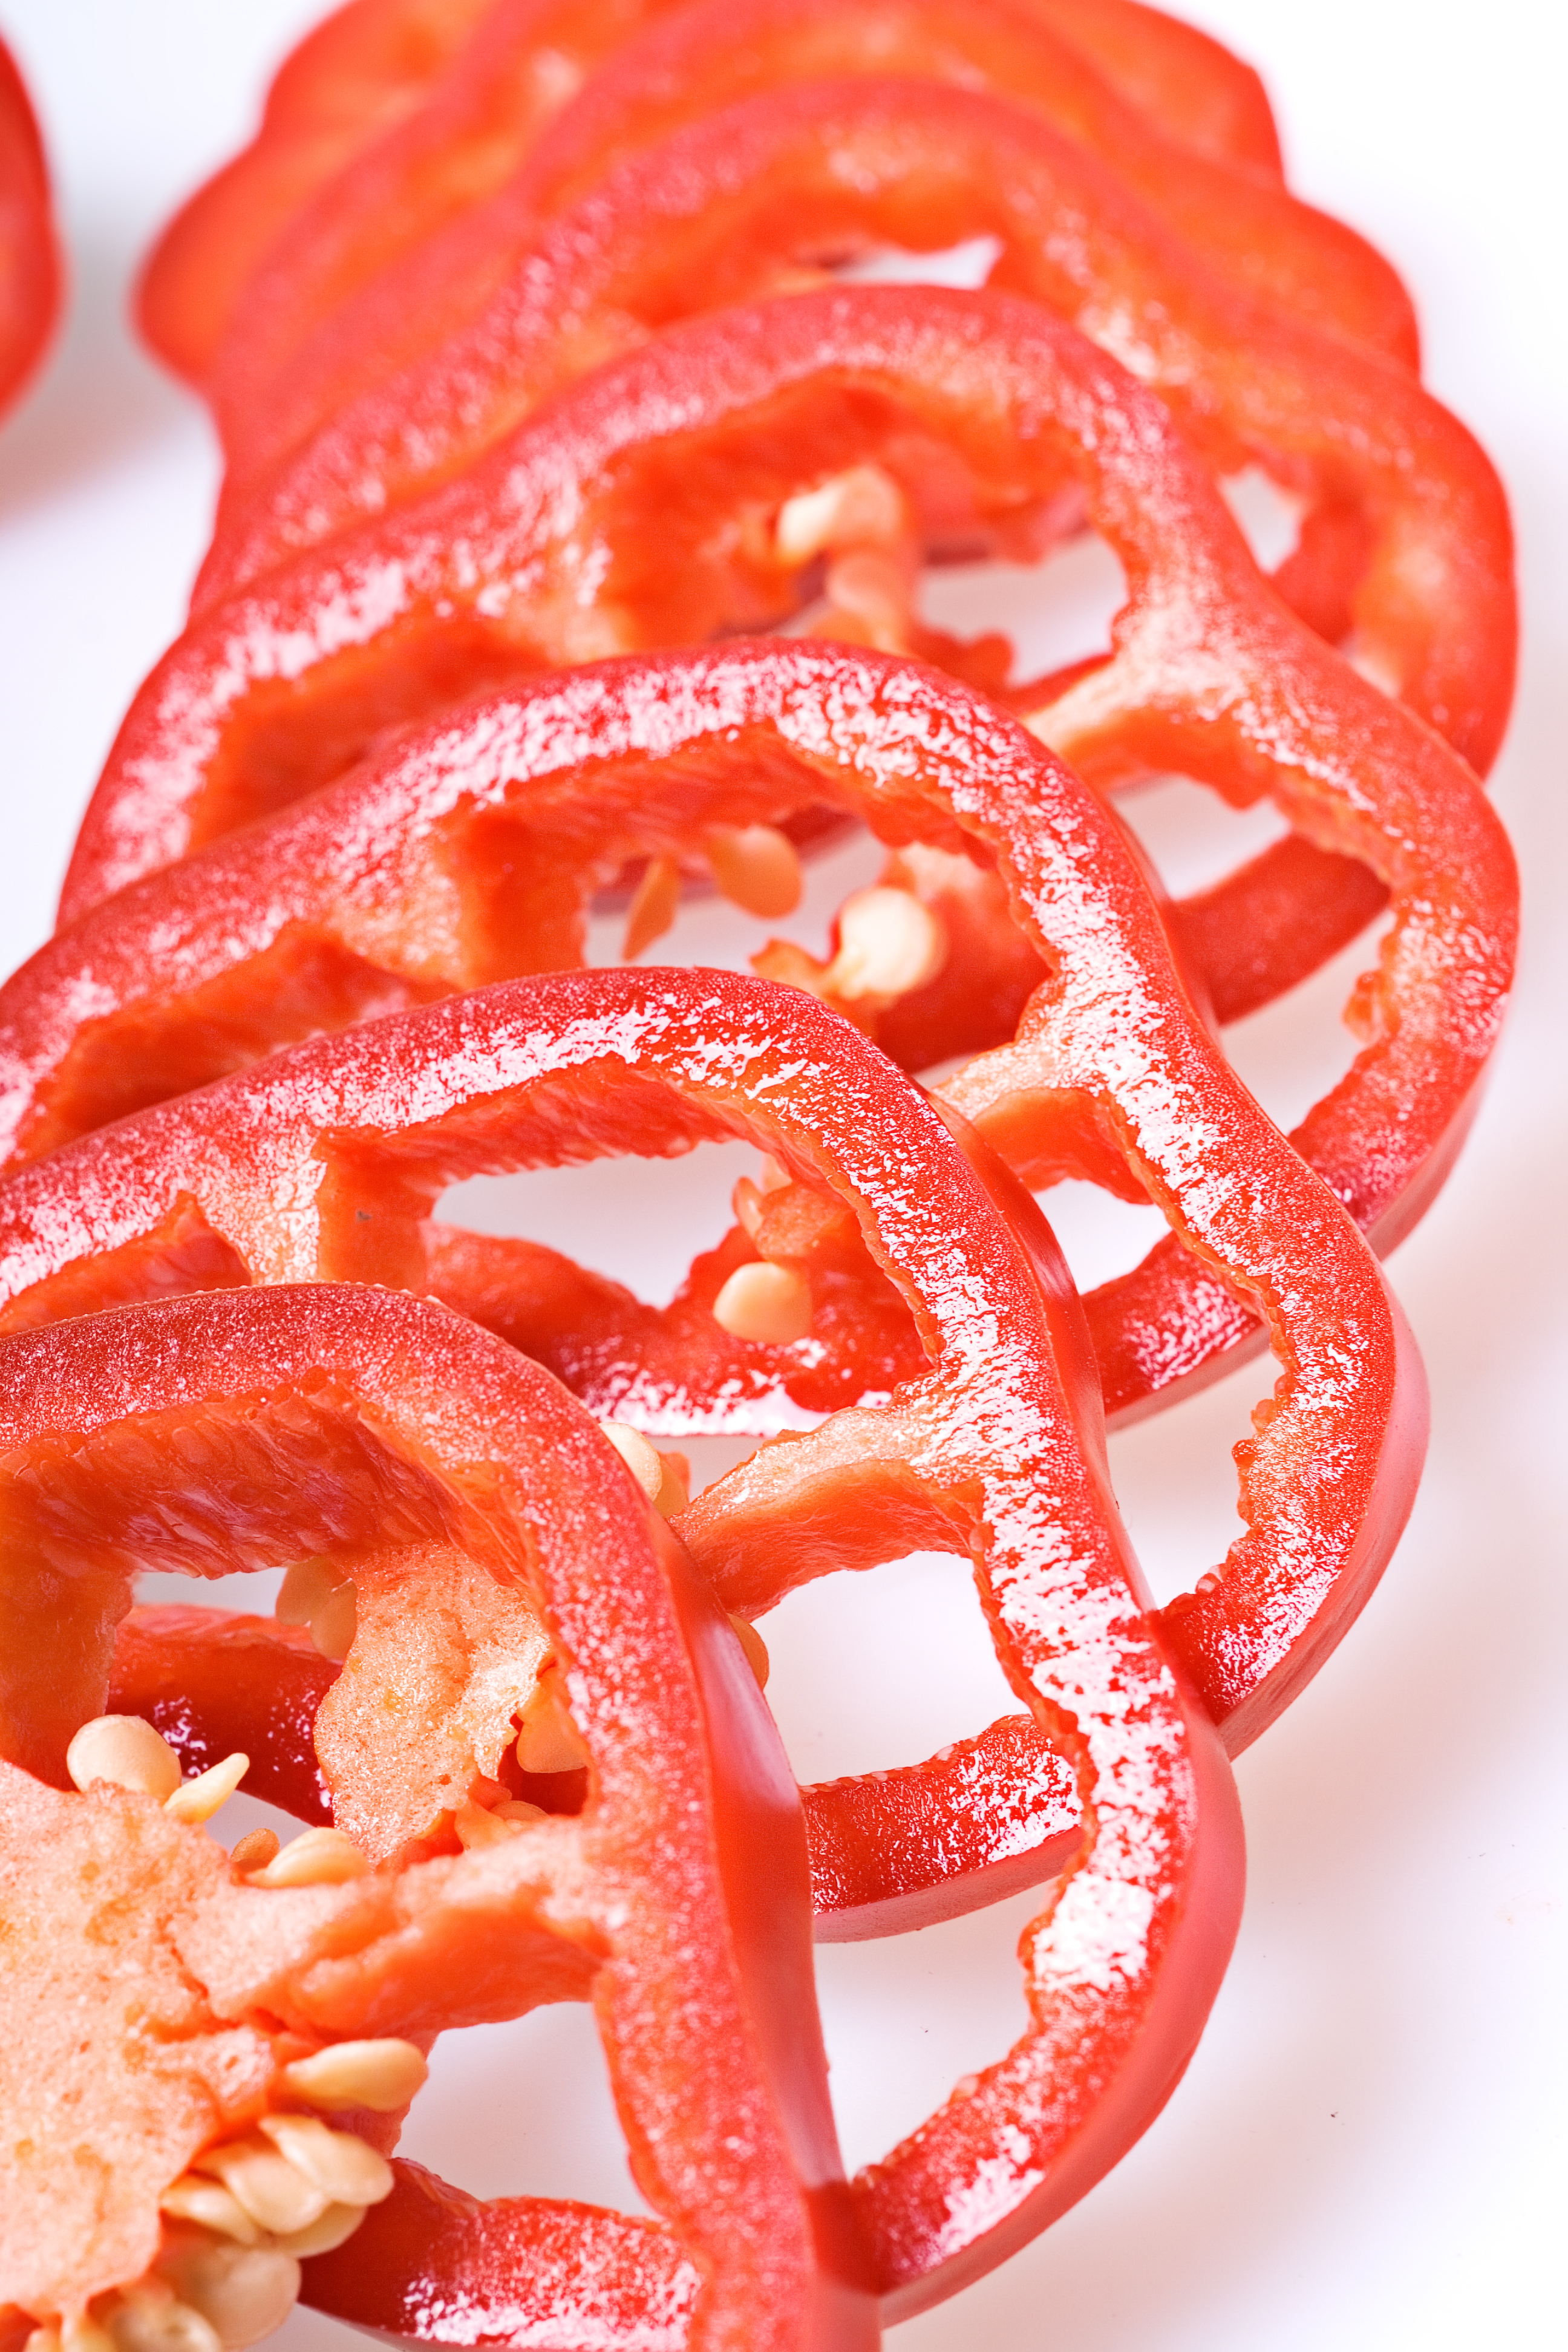 Sliced peppers photo